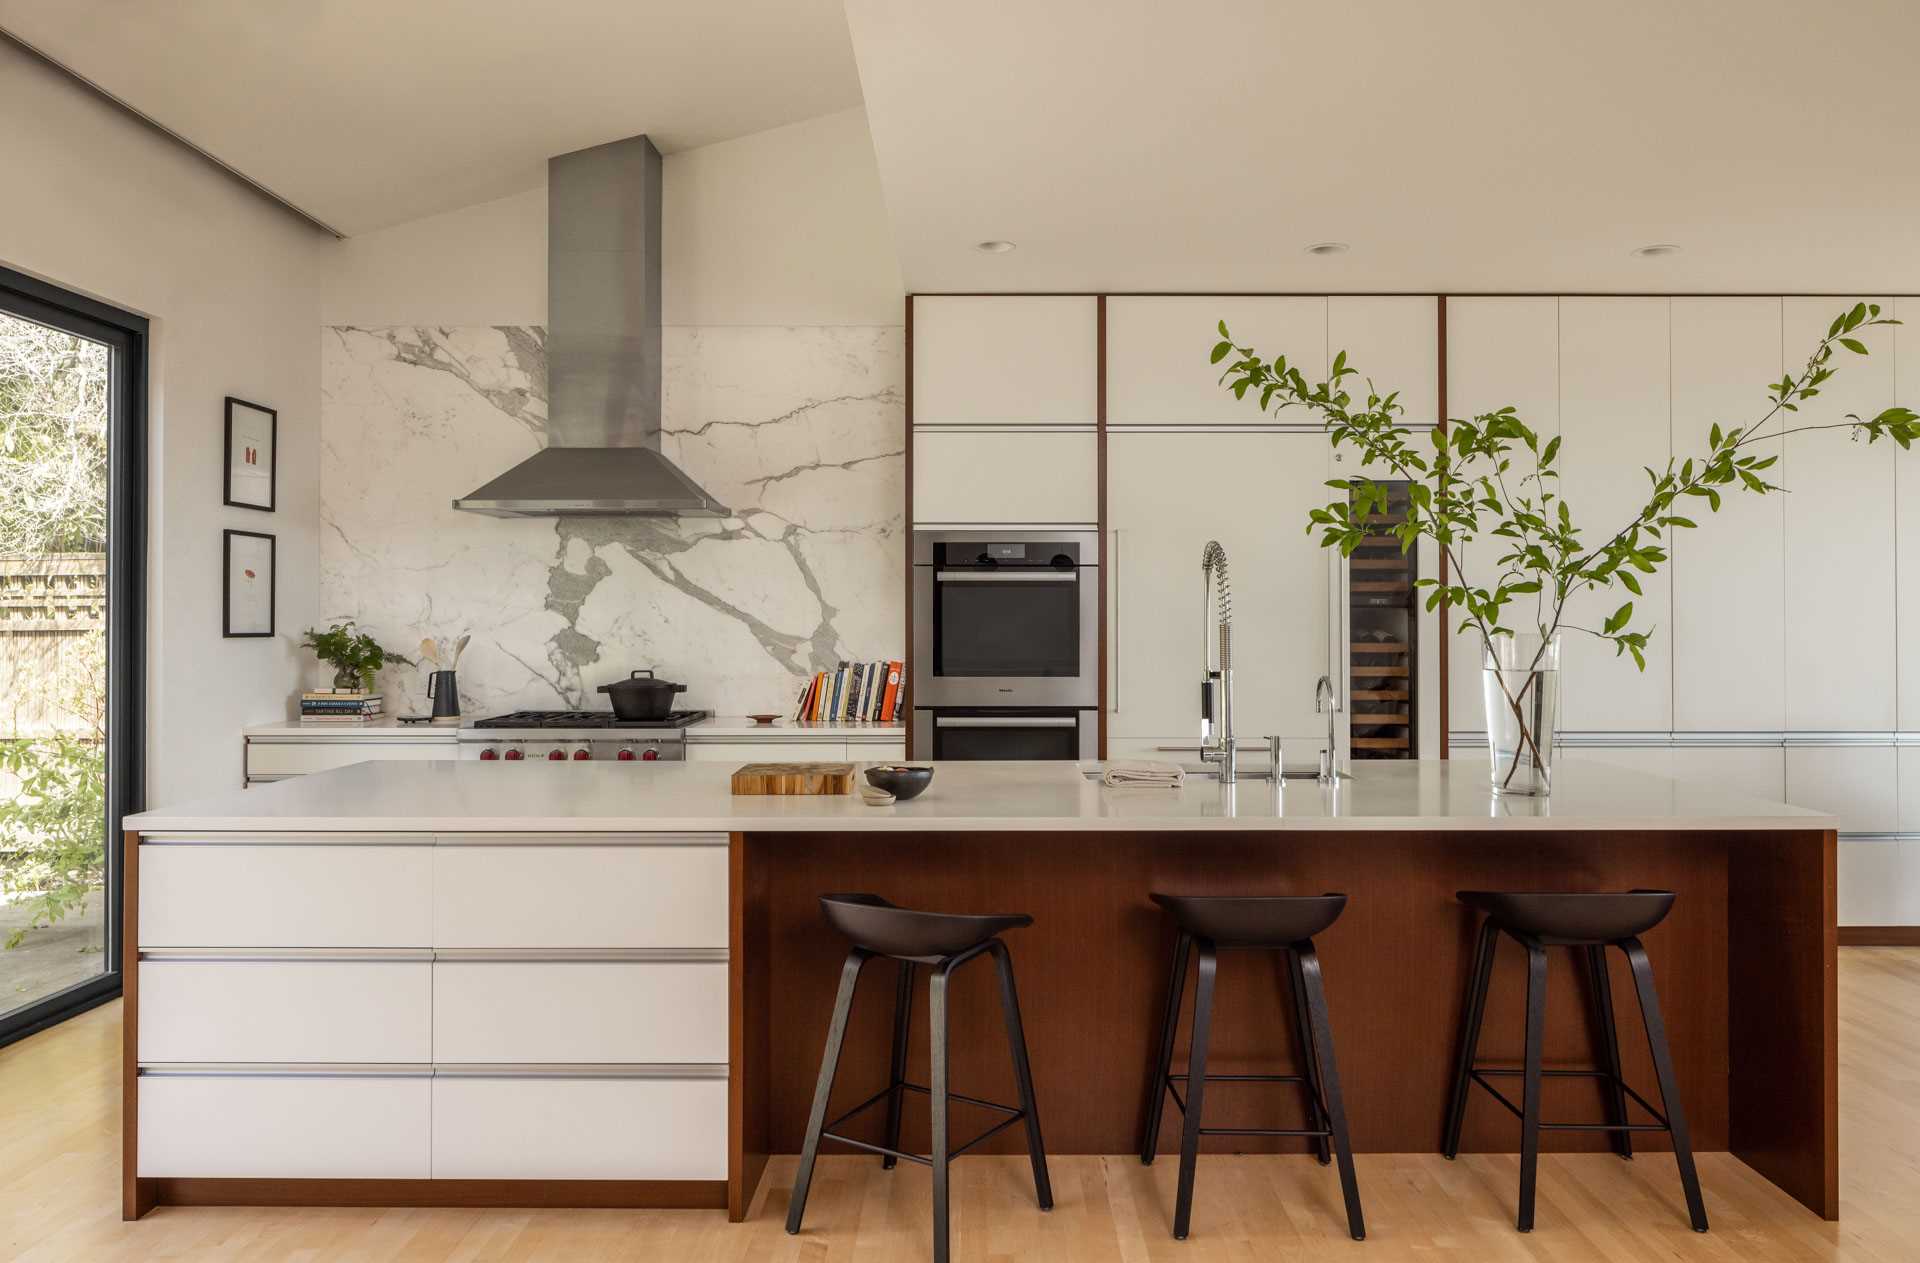 This new bright and open kitchen includes minimalist white cabinets with wood accents.